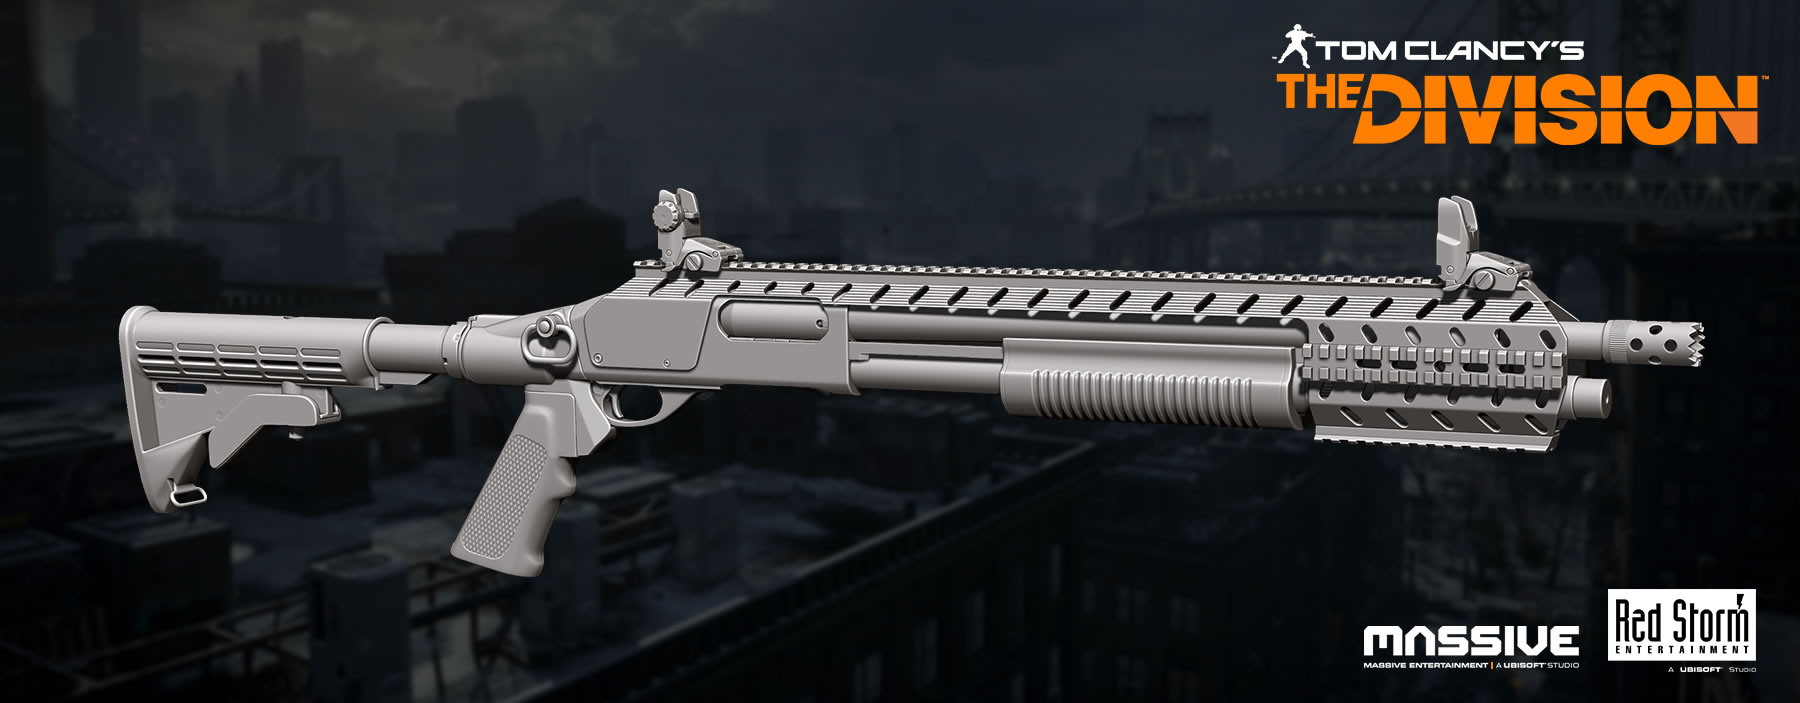 The Division Weapon-Rendershots Incl. Video The Zone